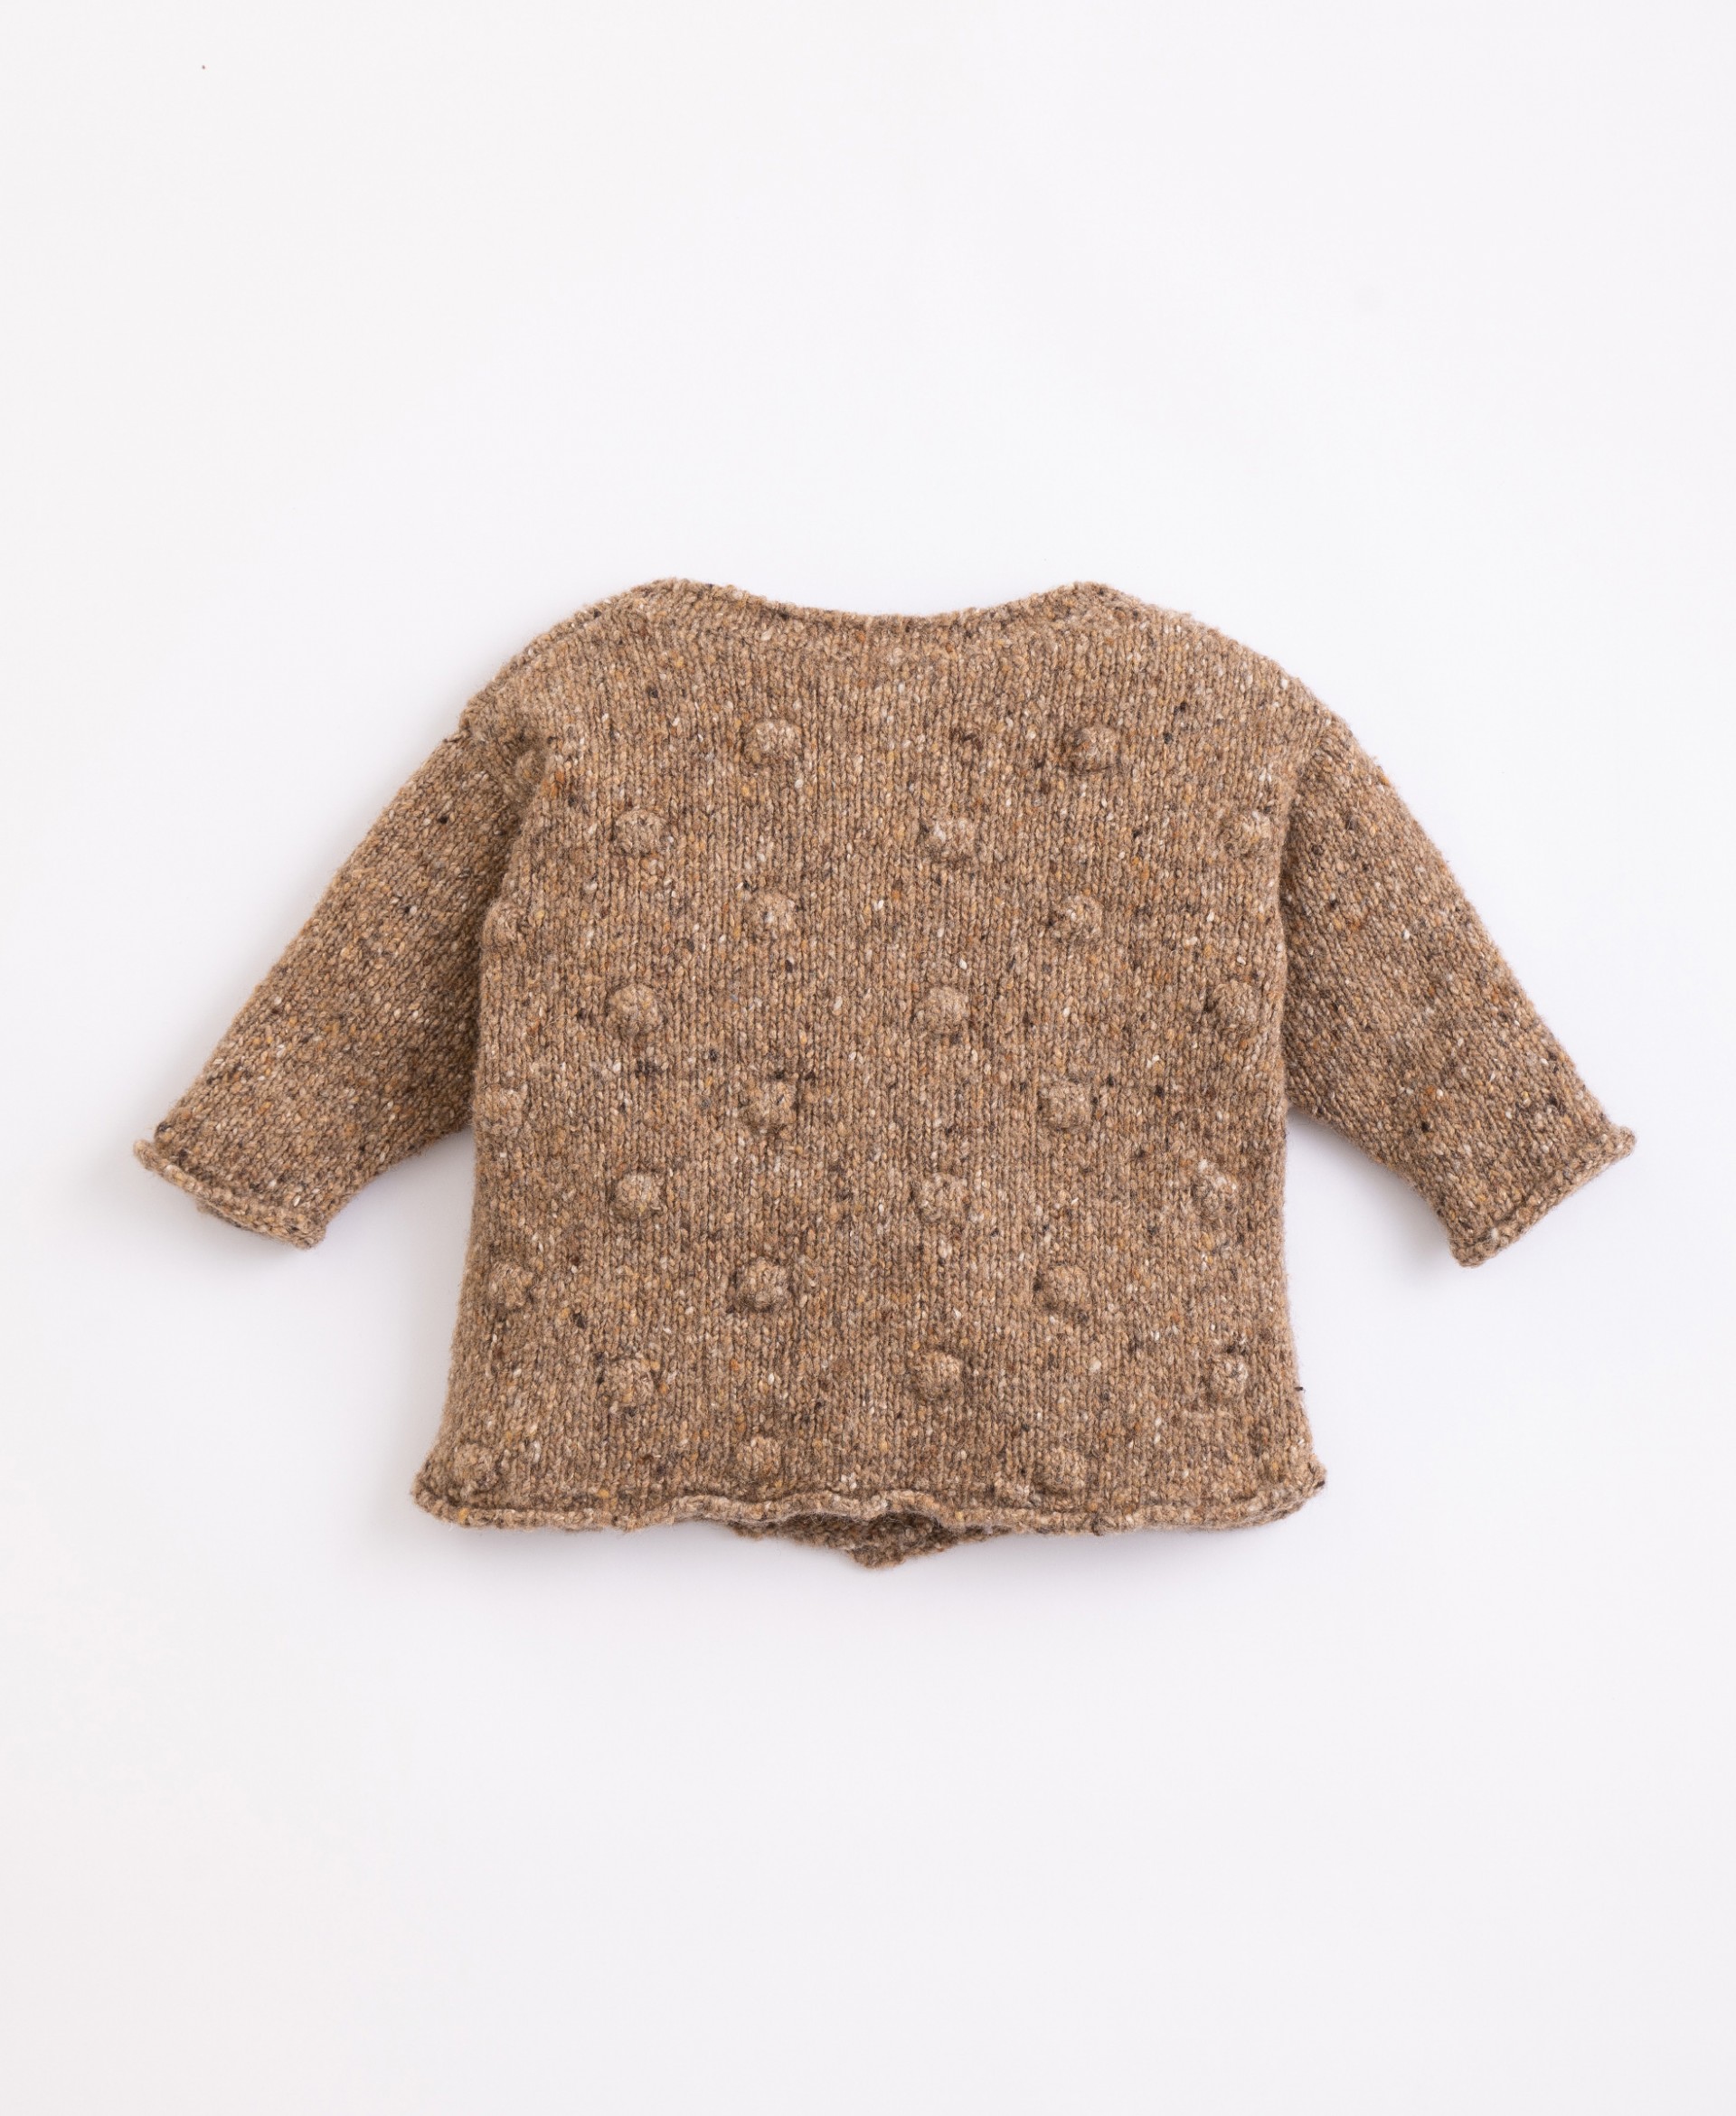 Knitted jacket with recycled fibres | Illustration